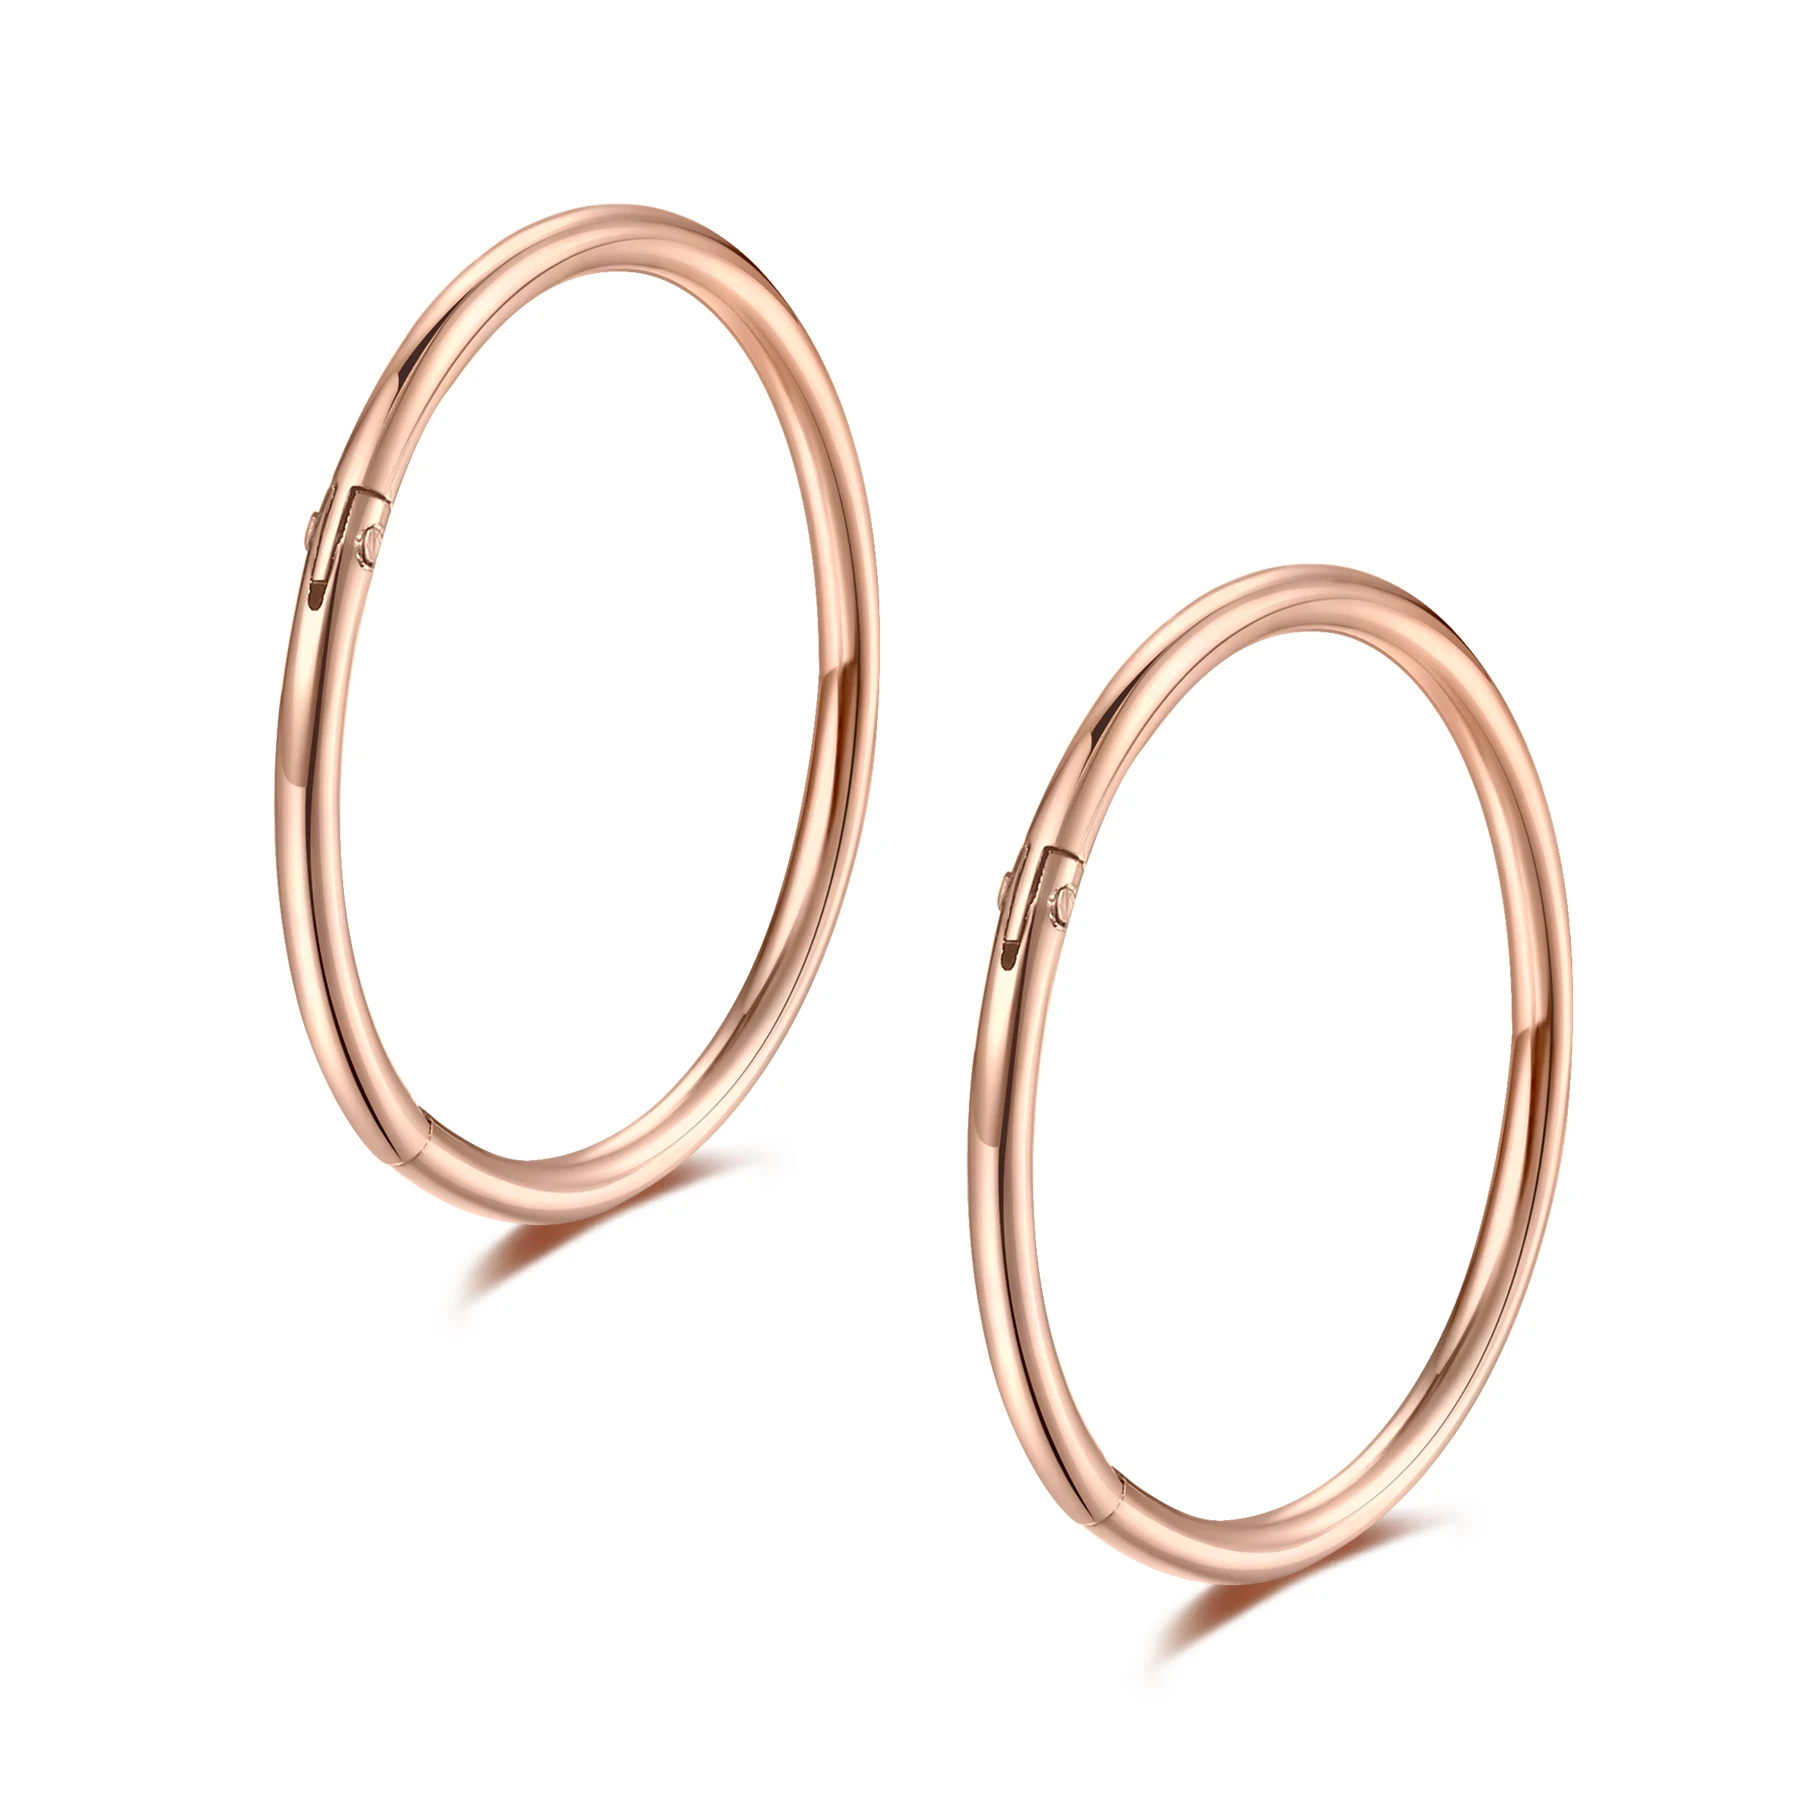 

Rose Gold Hinged 20g 18g 16g Nose Rings Hoops Septum Ring Clicker Cartilage Helix Hoop Earrings 6-16mm, Rose gold color